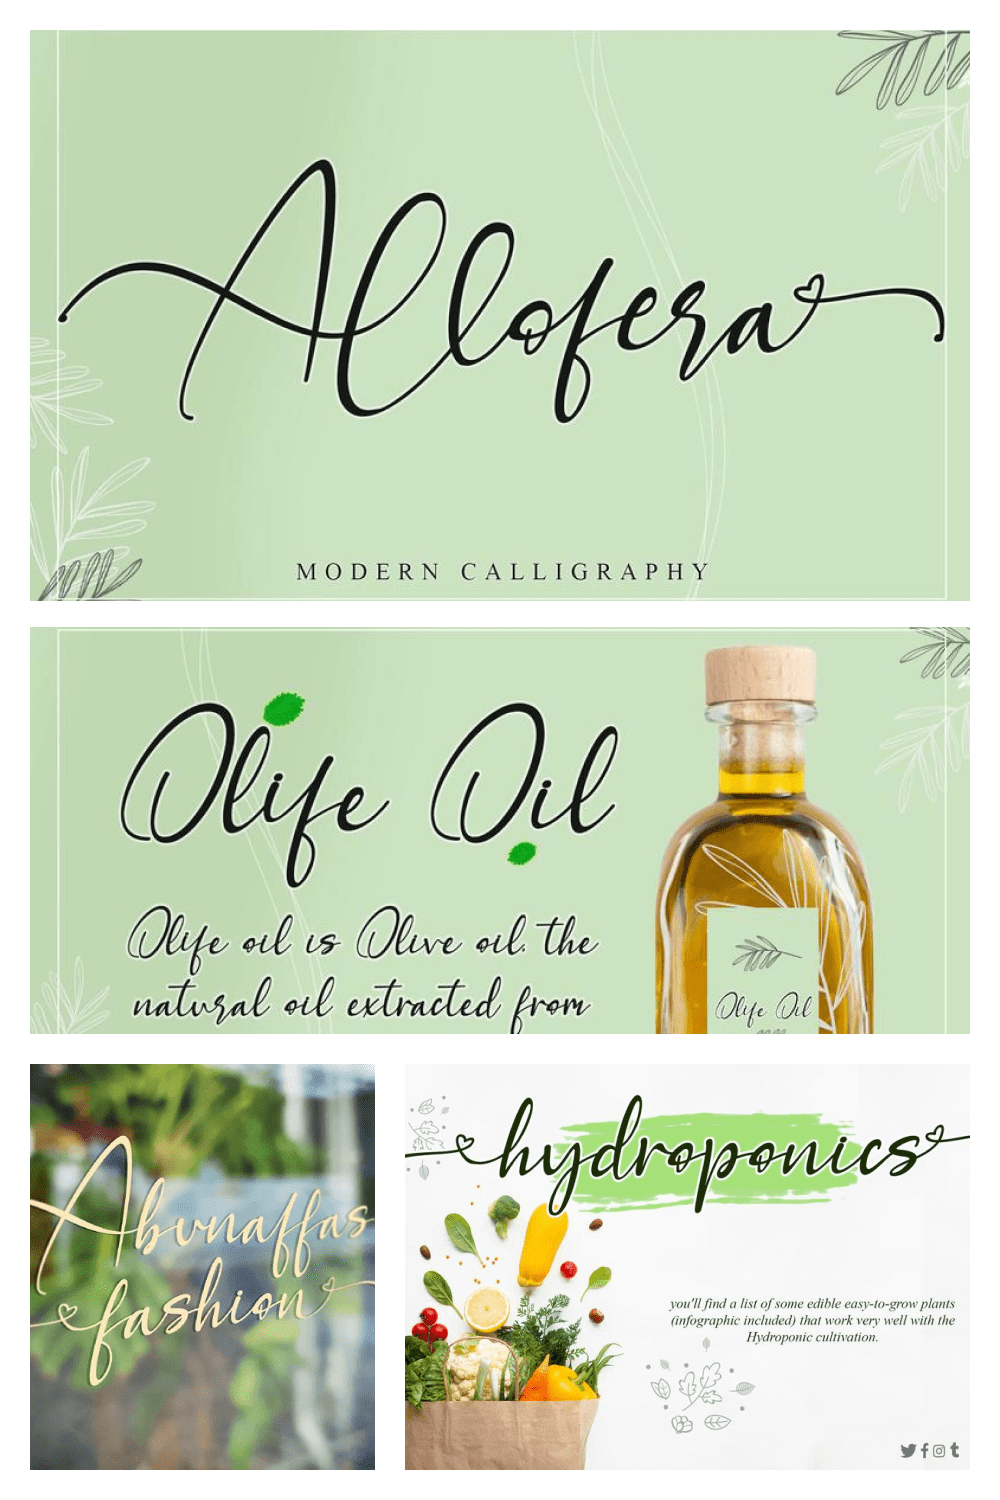 Allofera is a beautiful font designed with an incredibly modern feel.